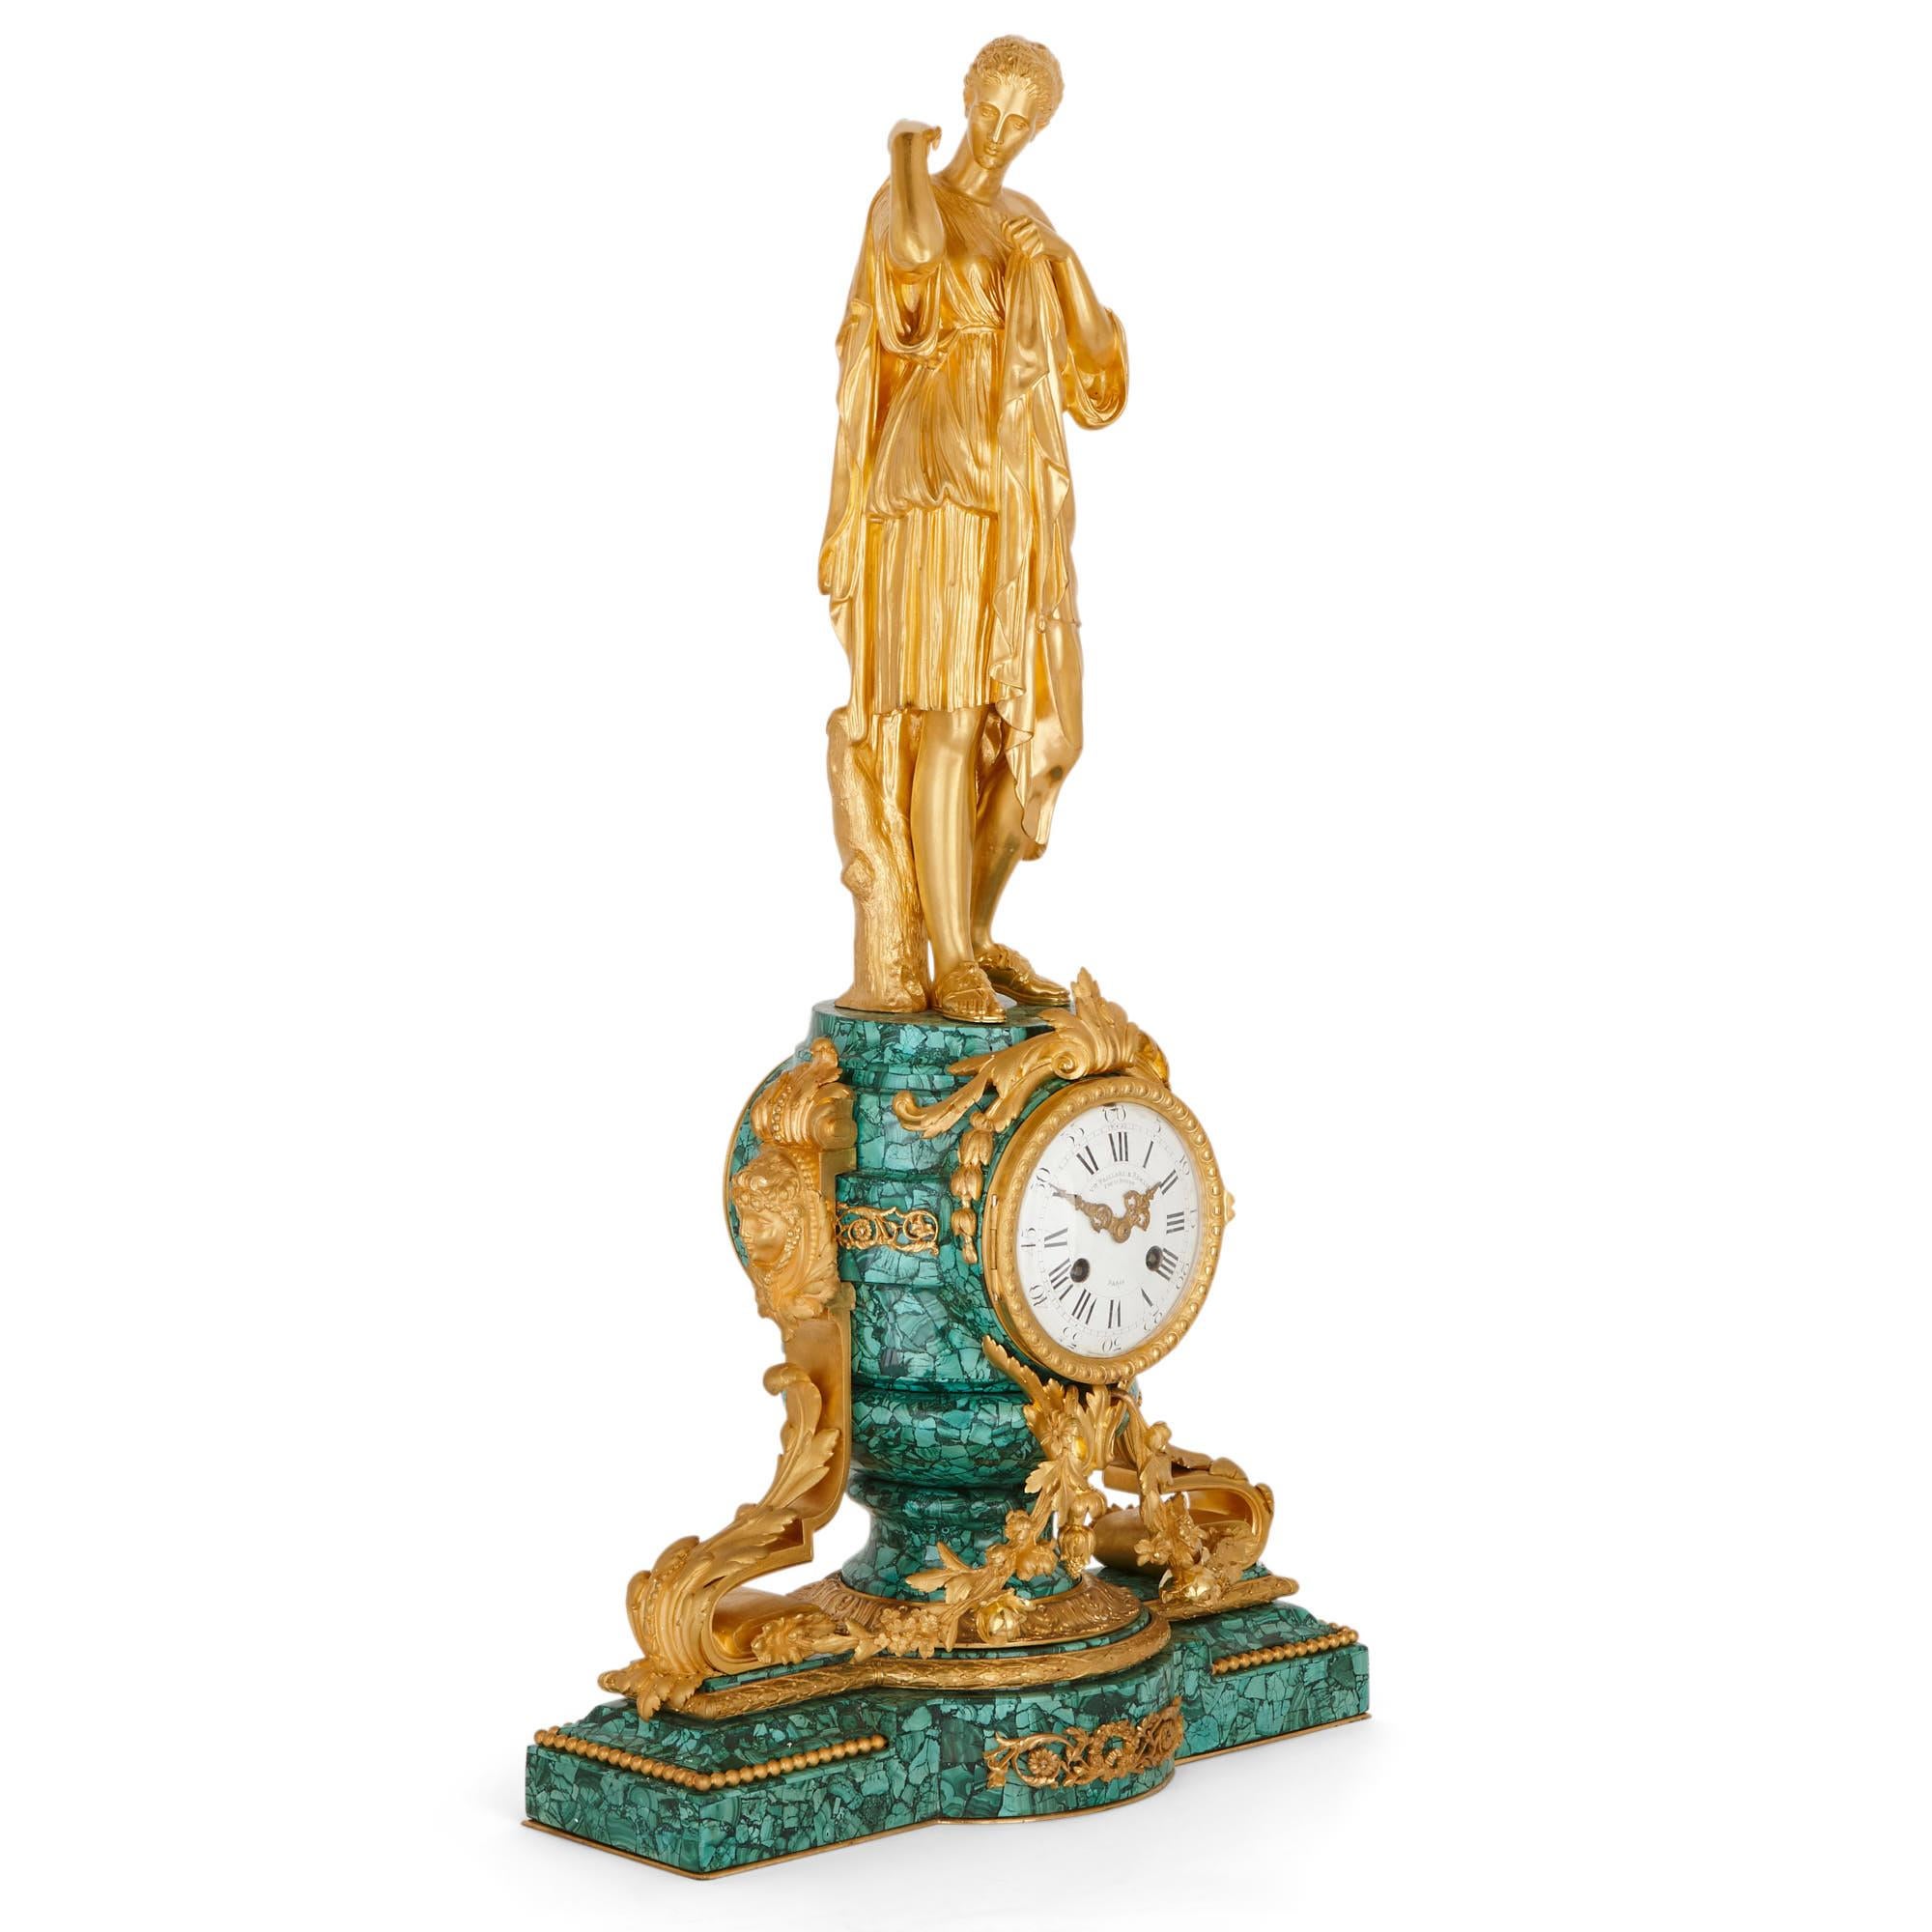 This wonderful clock set was created in France in circa 1870, in the late 19th century. The set, which consists of a mantel clock and pair of candelabra is crafted from gilt bronze (ormolu) and the green gemstone, malachite.

The mantel clock